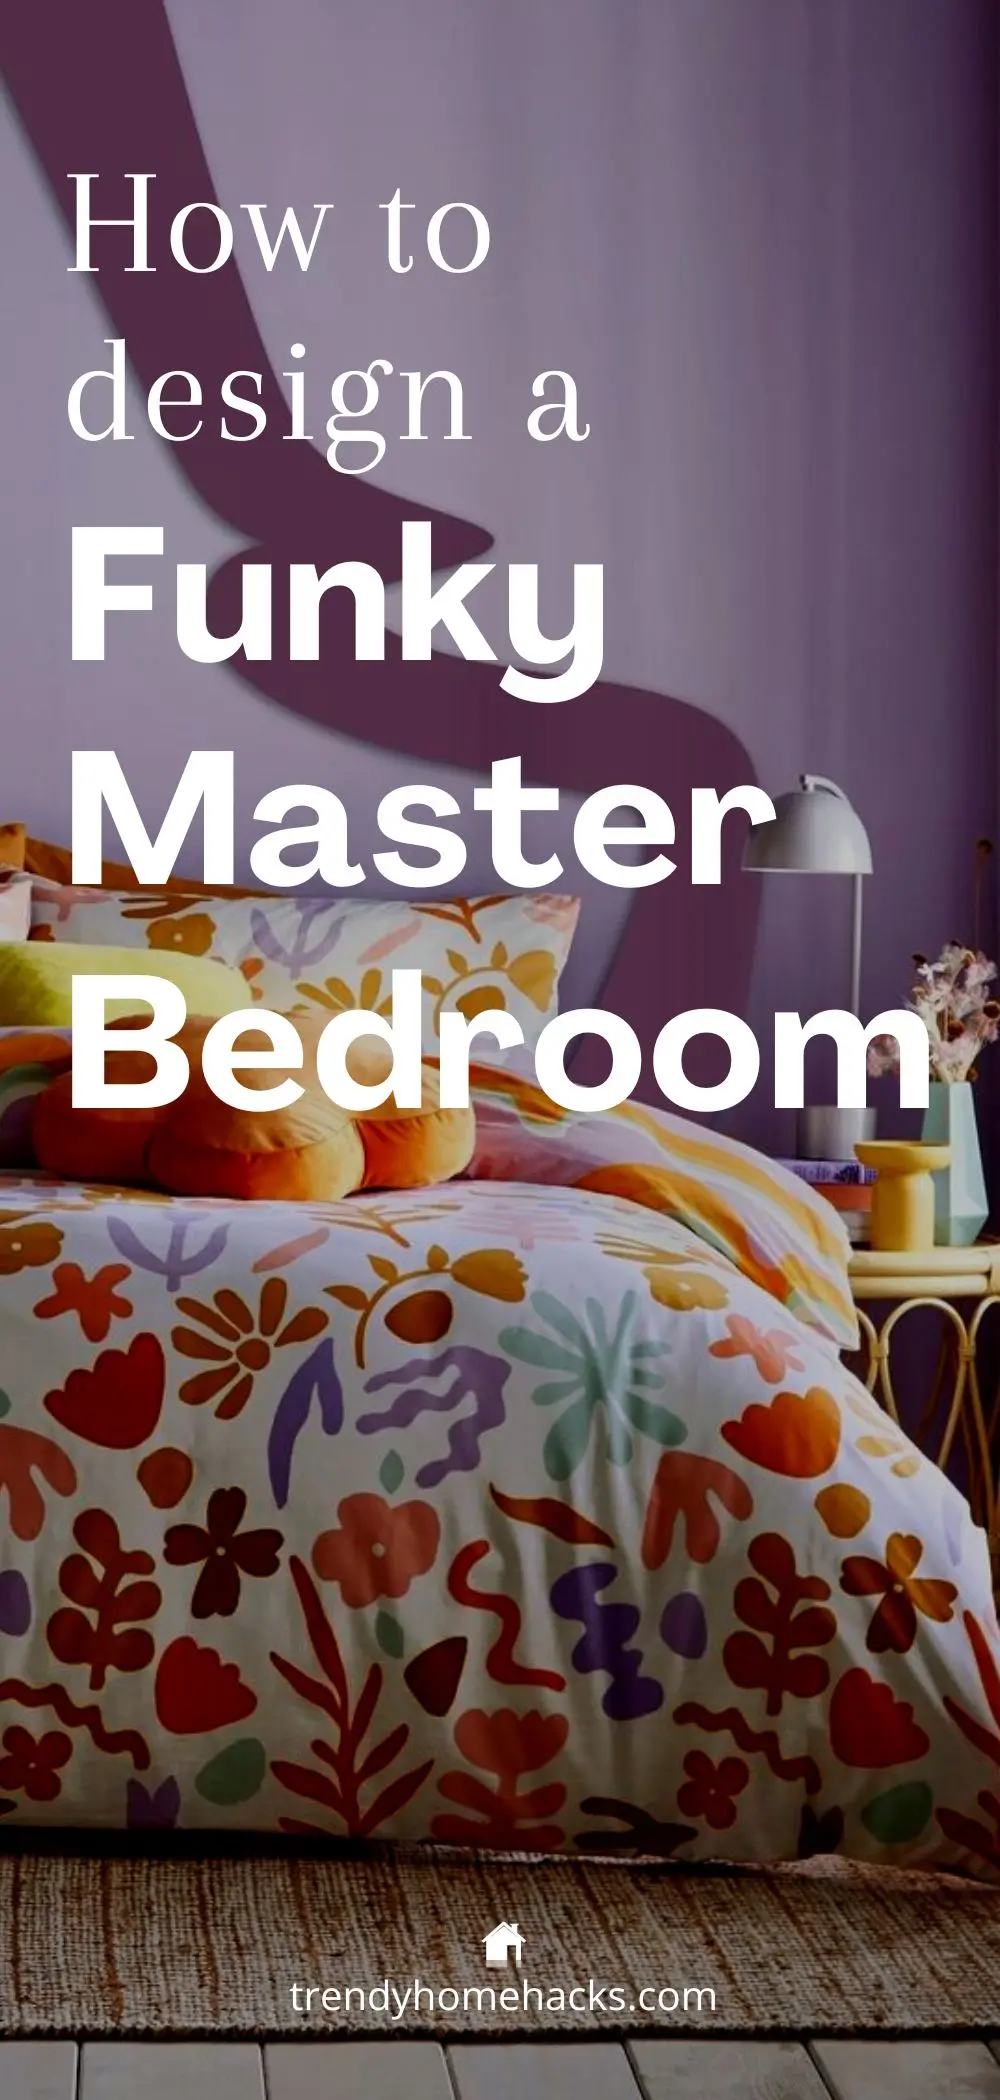 a bedroom in the background with overlay text saying "How to design a Funky Master Bedroom" can be pinned on a Pinterest board for future reference.